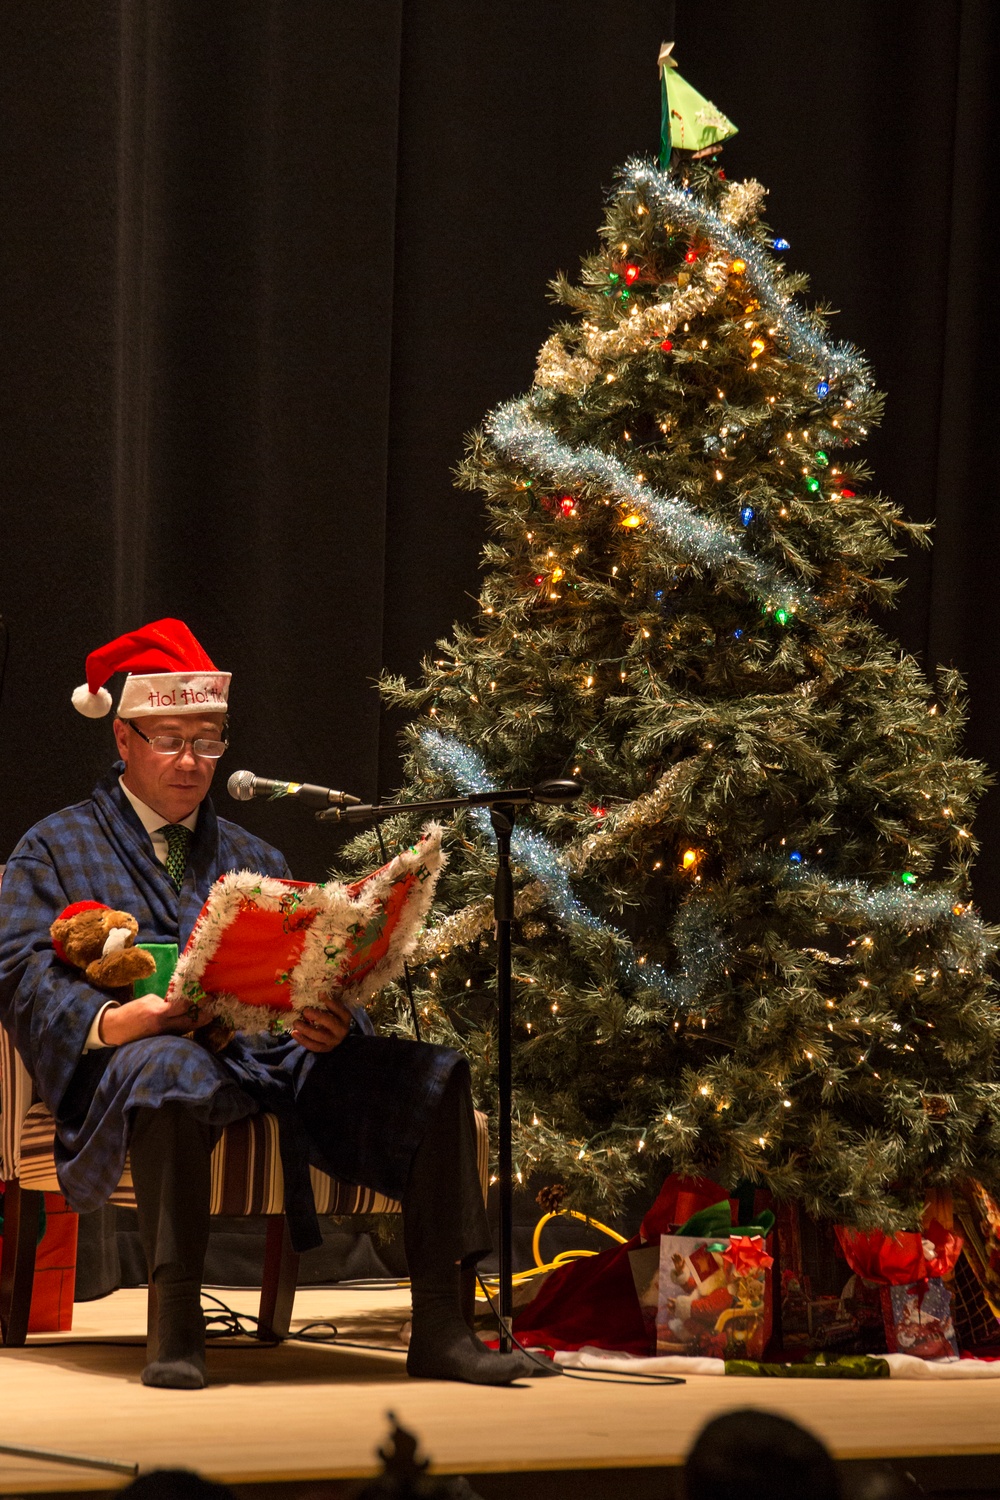 M.C. Perry, Japanese students spread holiday spirit throughout MCAS Iwakuni